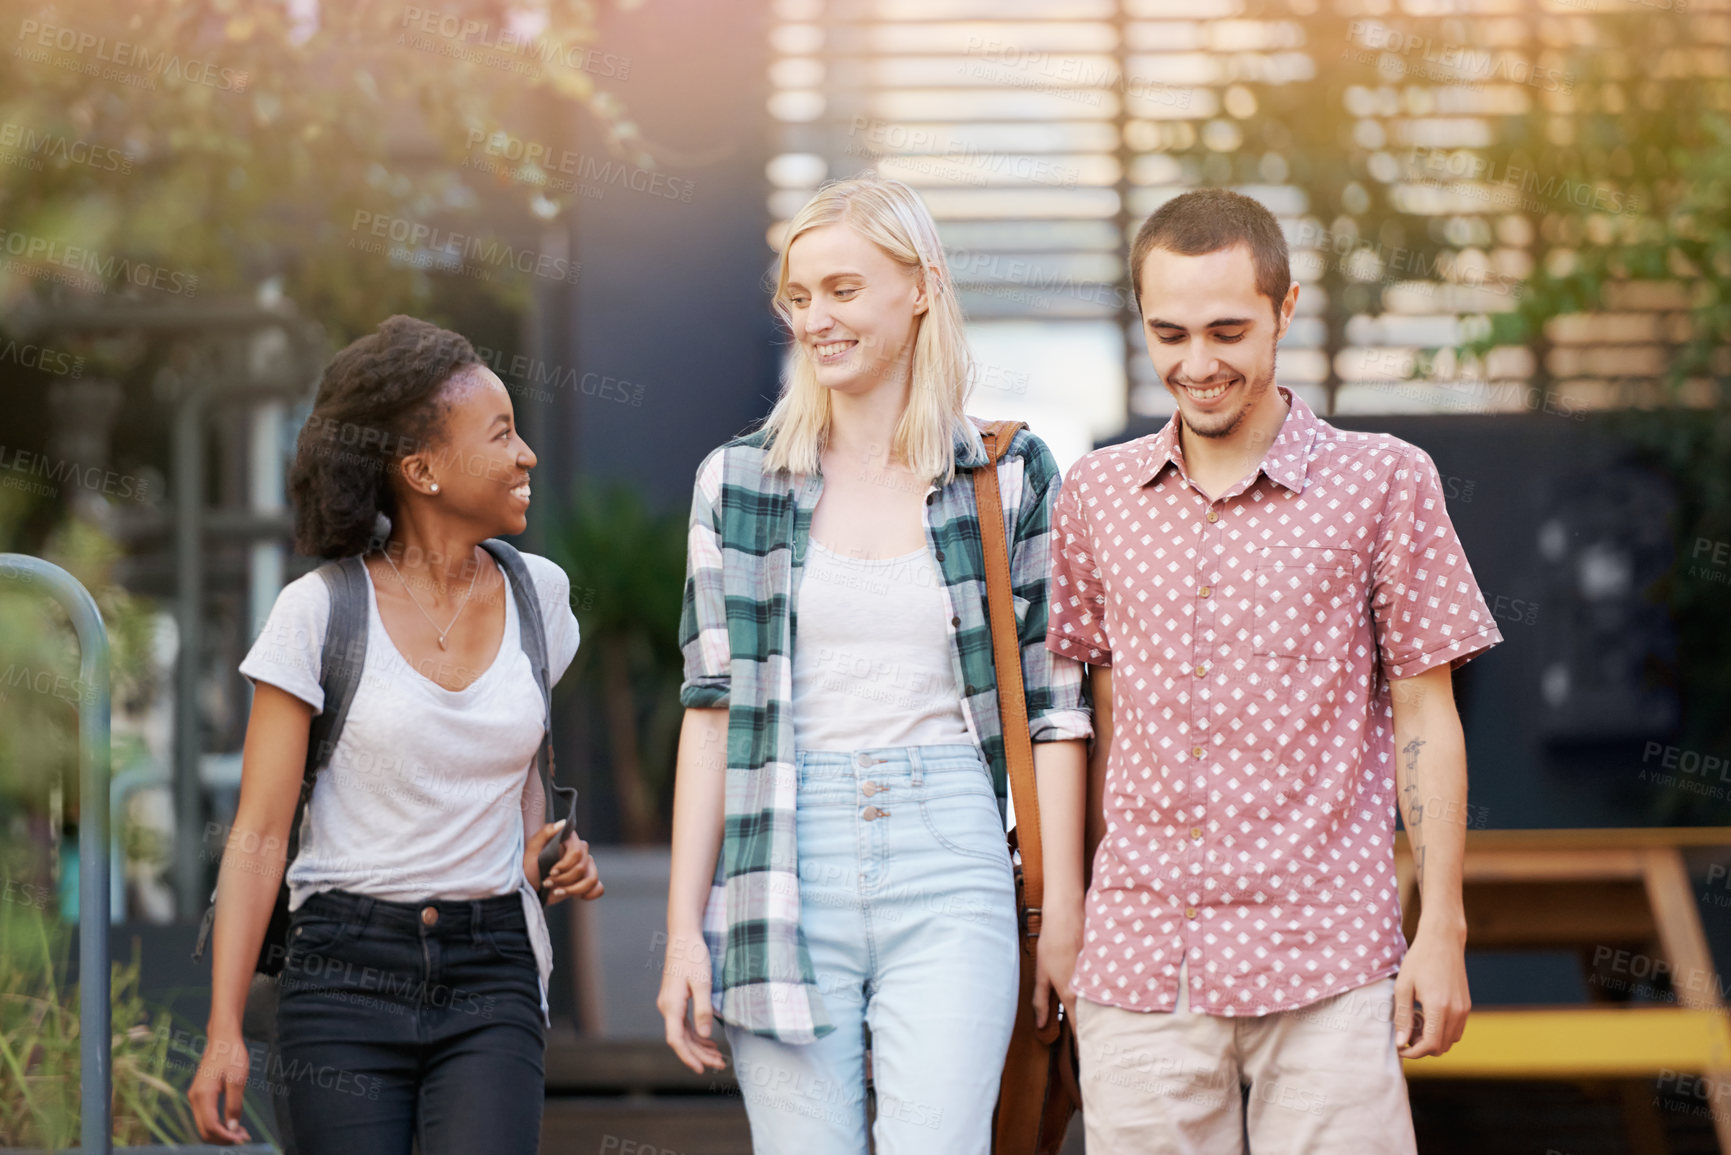 Buy stock photo Walking, talk and young students at university planning for study, assignment or test with scholarship. Networking, discussion and young women with bags bonding and conversation at college campus.